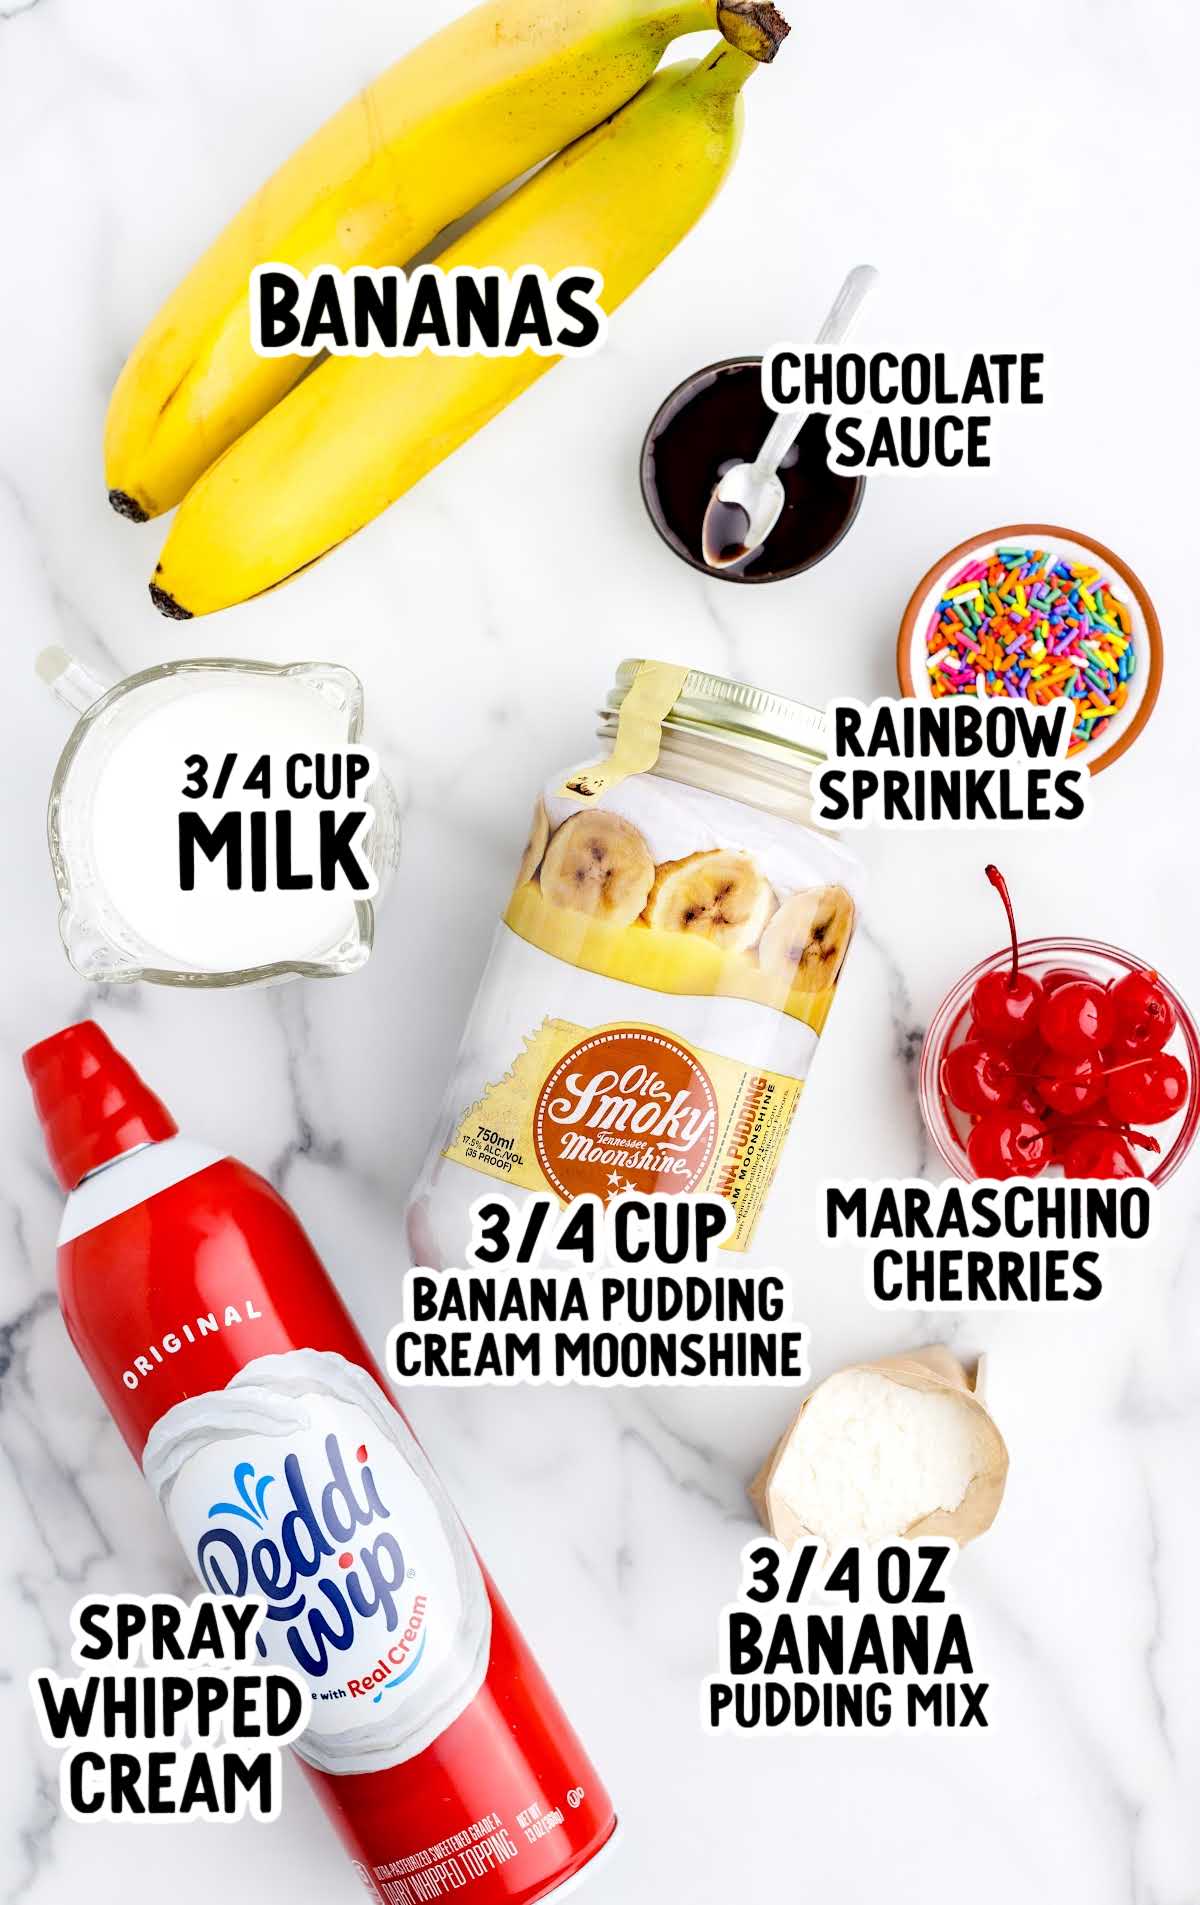 Banana Split Jello Shots raw ingredients that are labeled